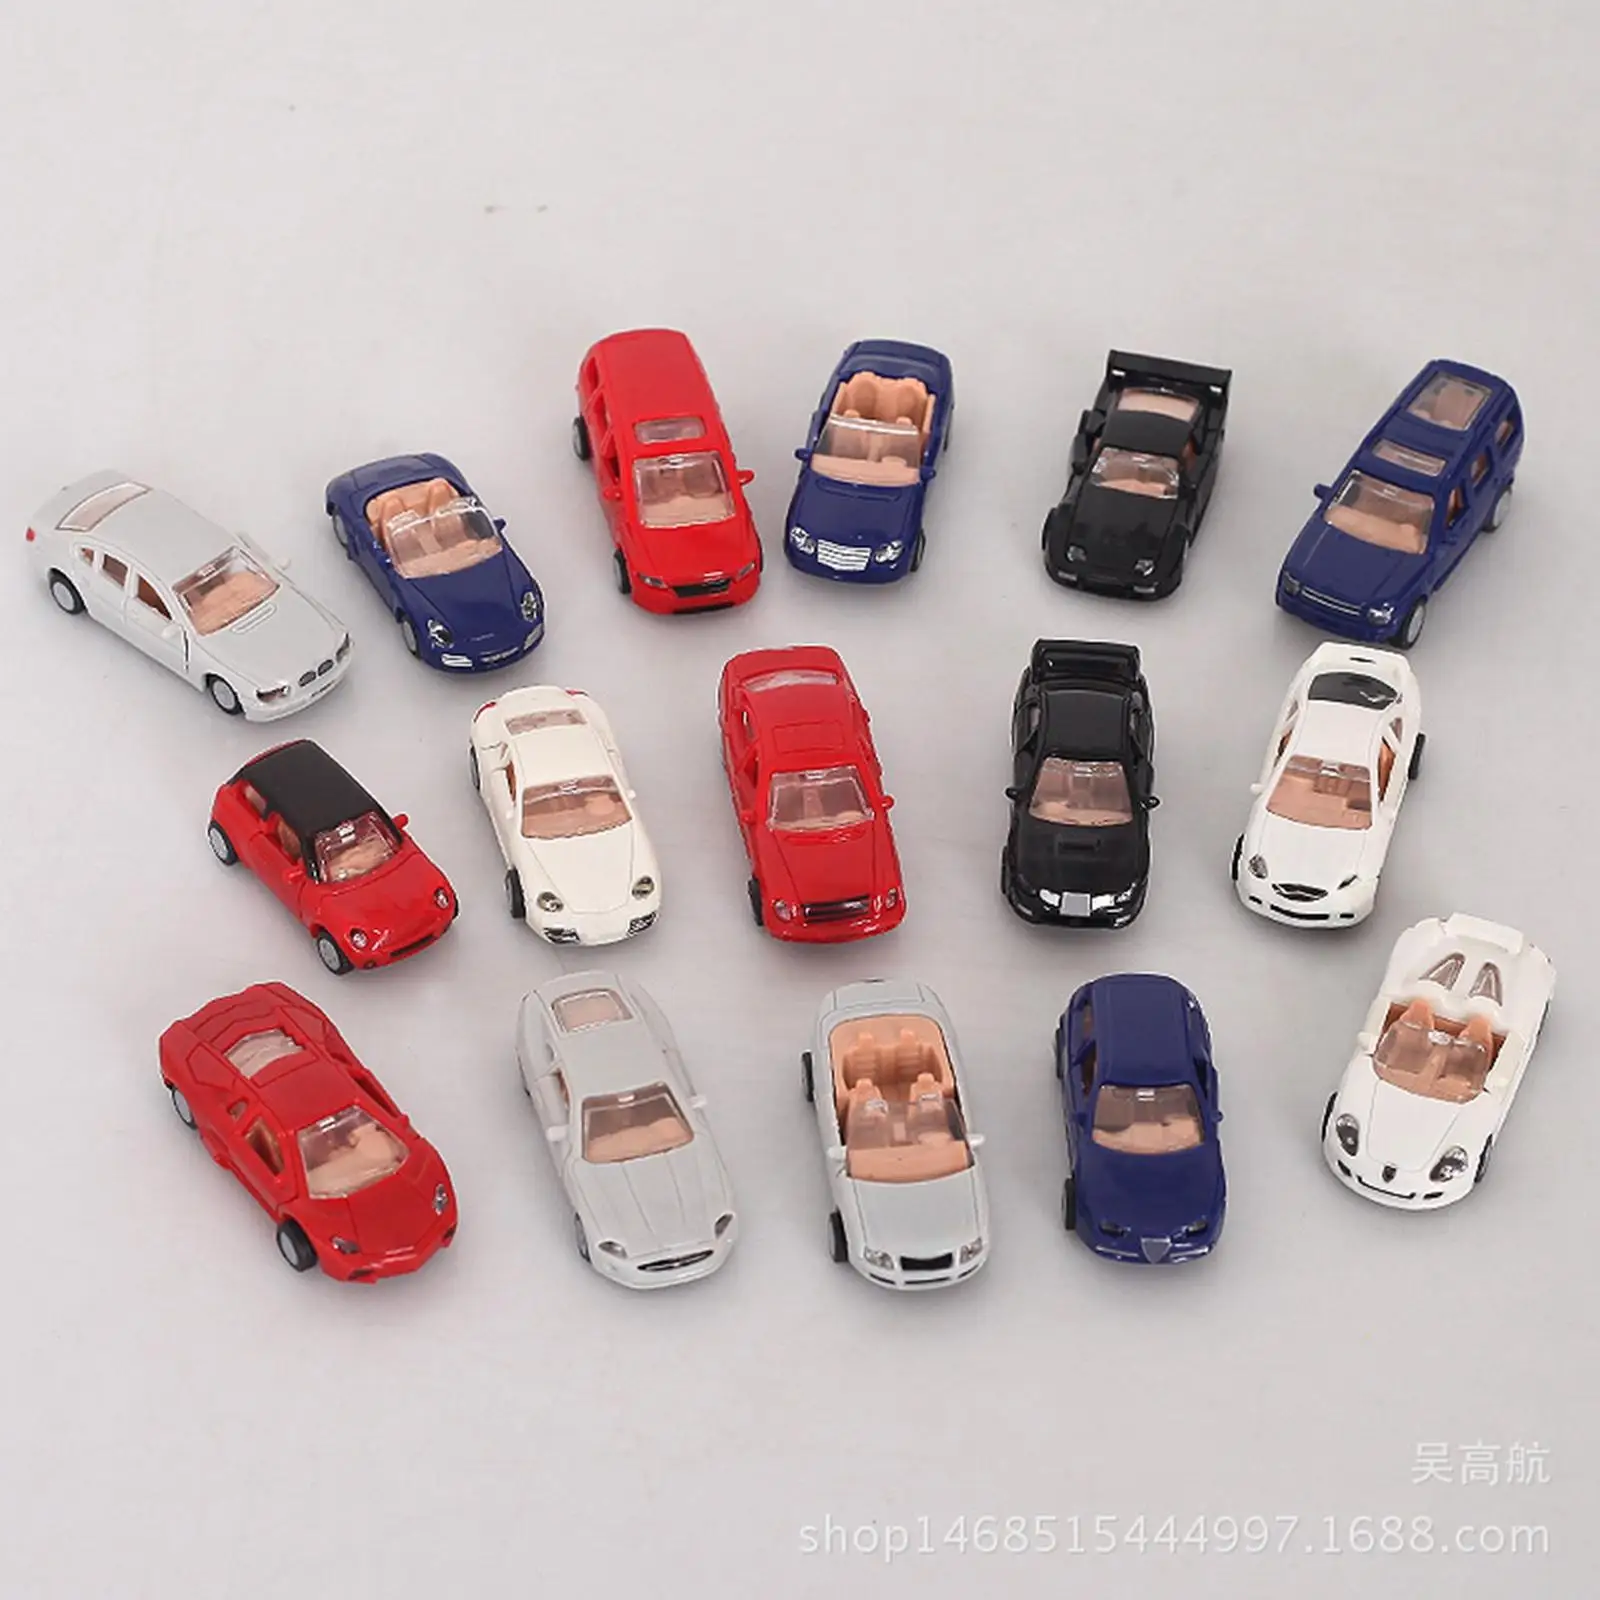 16x Vehicle Model Toy World Famous Car Models Micro Landscape Children Toy DIY collection Model Car Model Collection